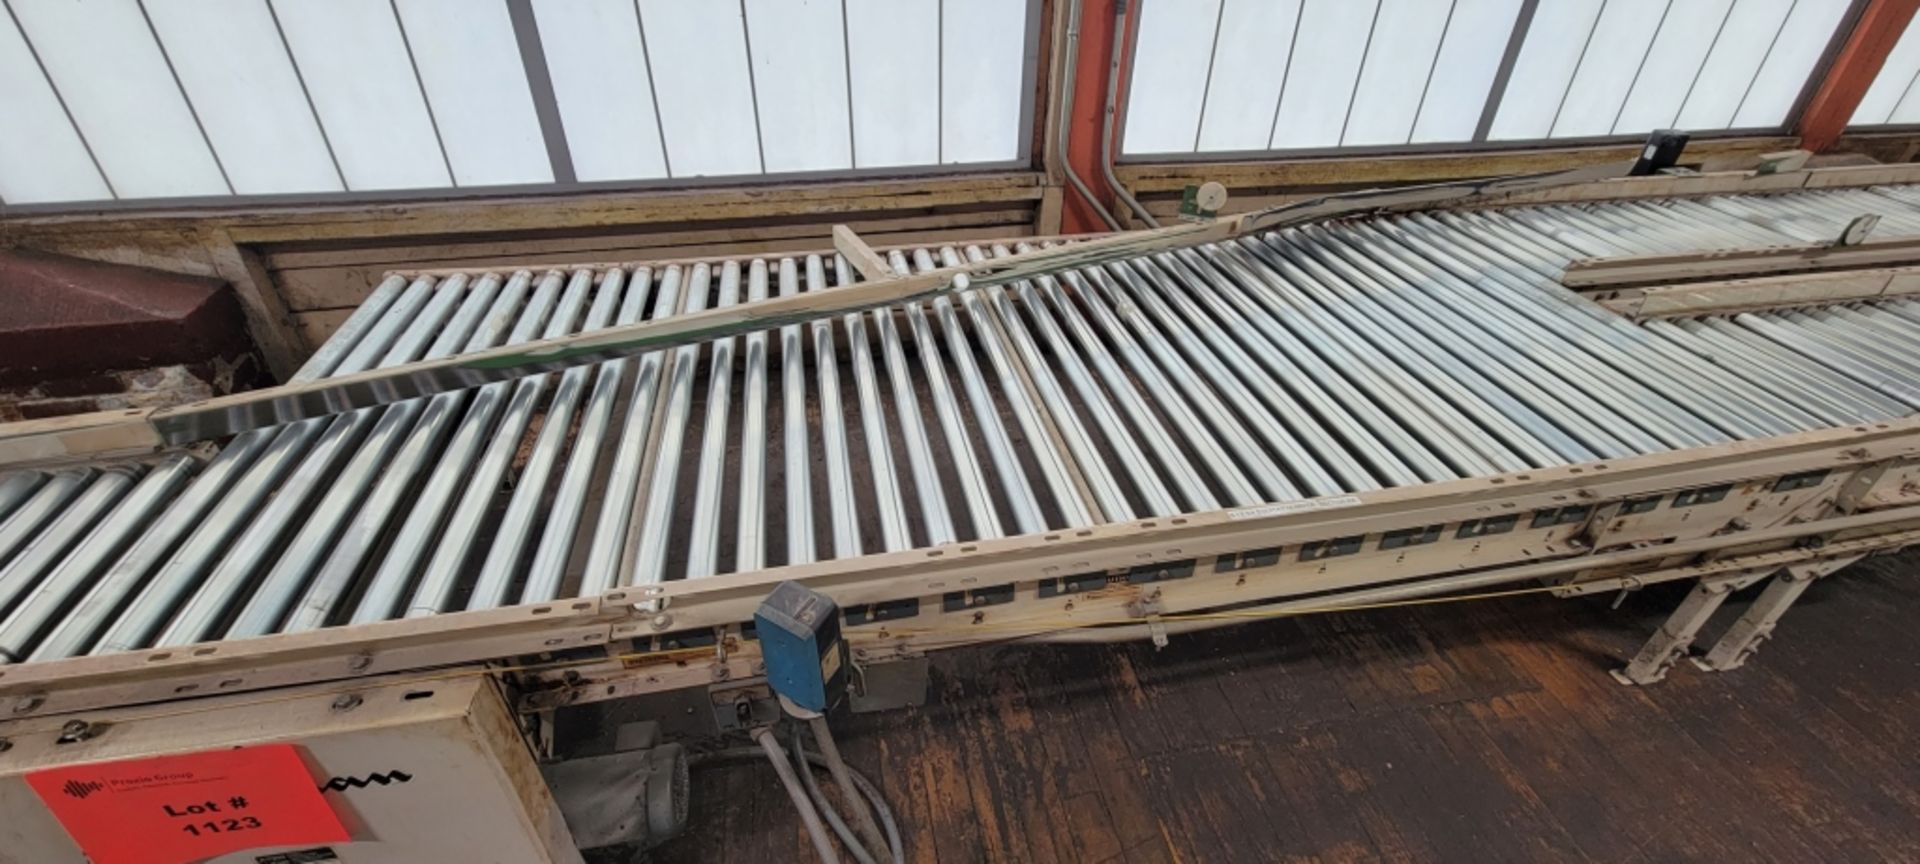 Buschman Inclined Conveyor System - BULK BID FOR LOTS 1118 TO 1125 - Image 10 of 12